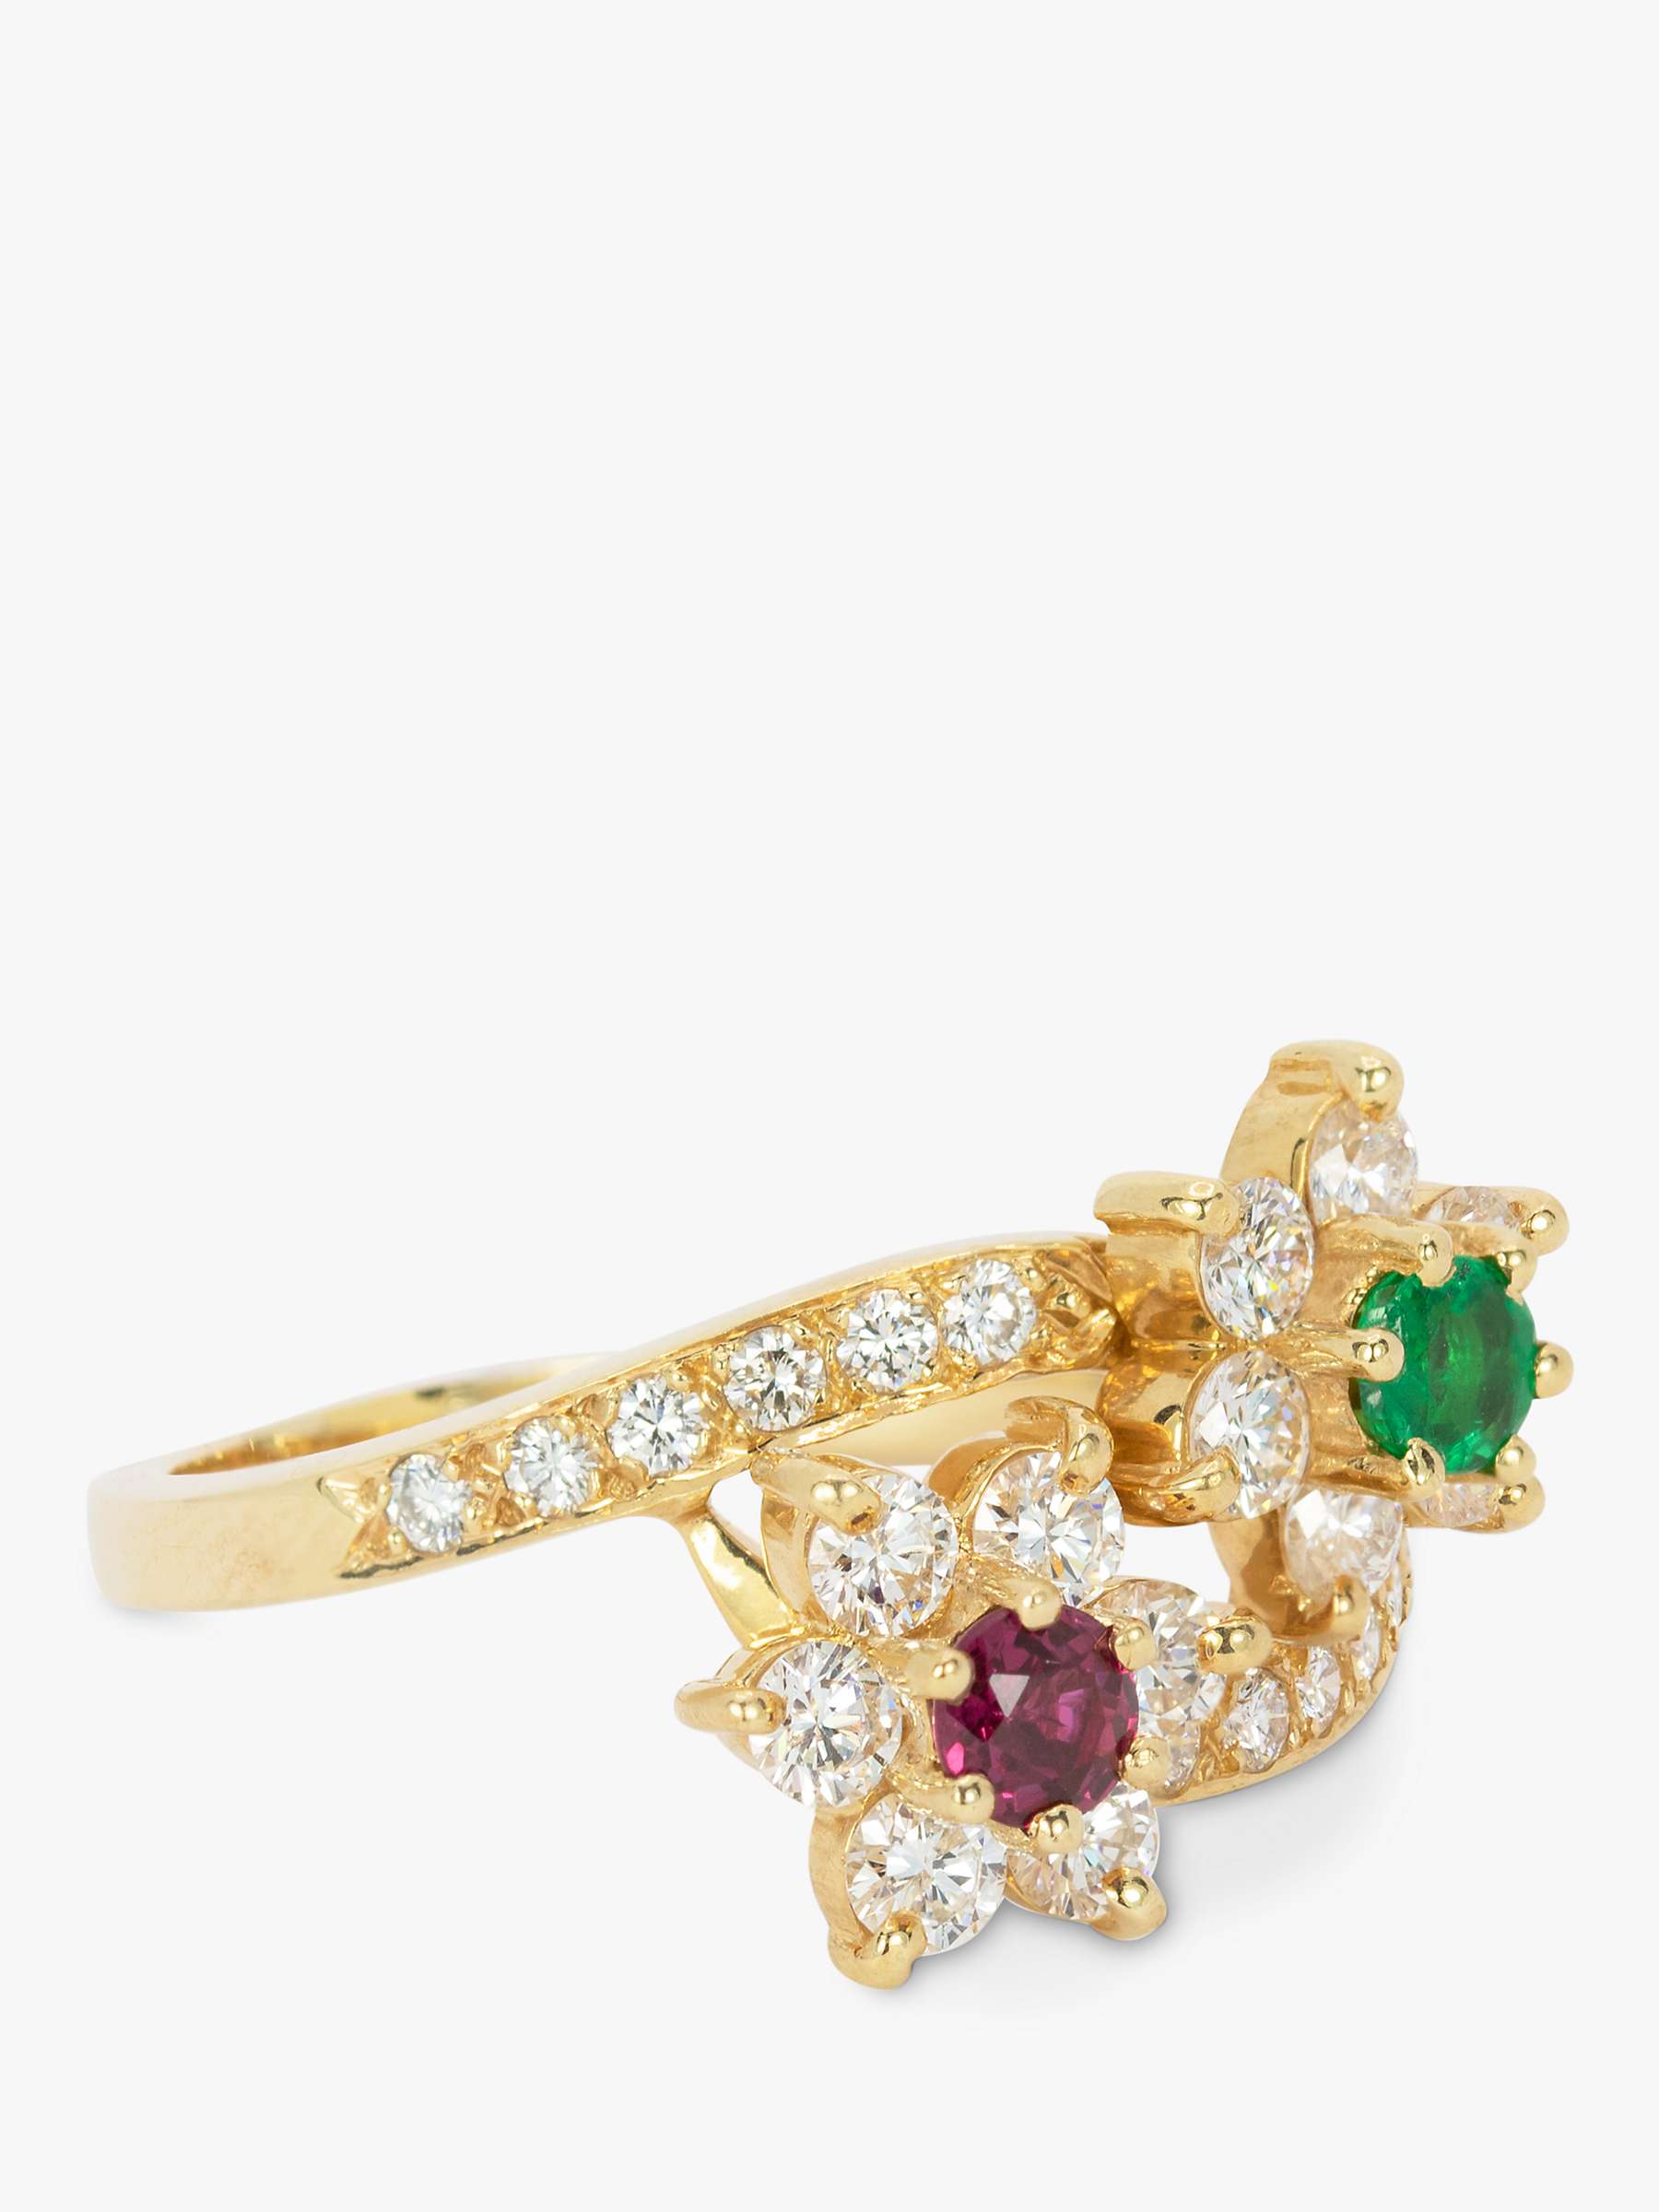 Buy Kojis Second Hand 14ct Yellow Gold Emerald, Ruby & Diamond Flower Cross Over Cocktail Ring Online at johnlewis.com